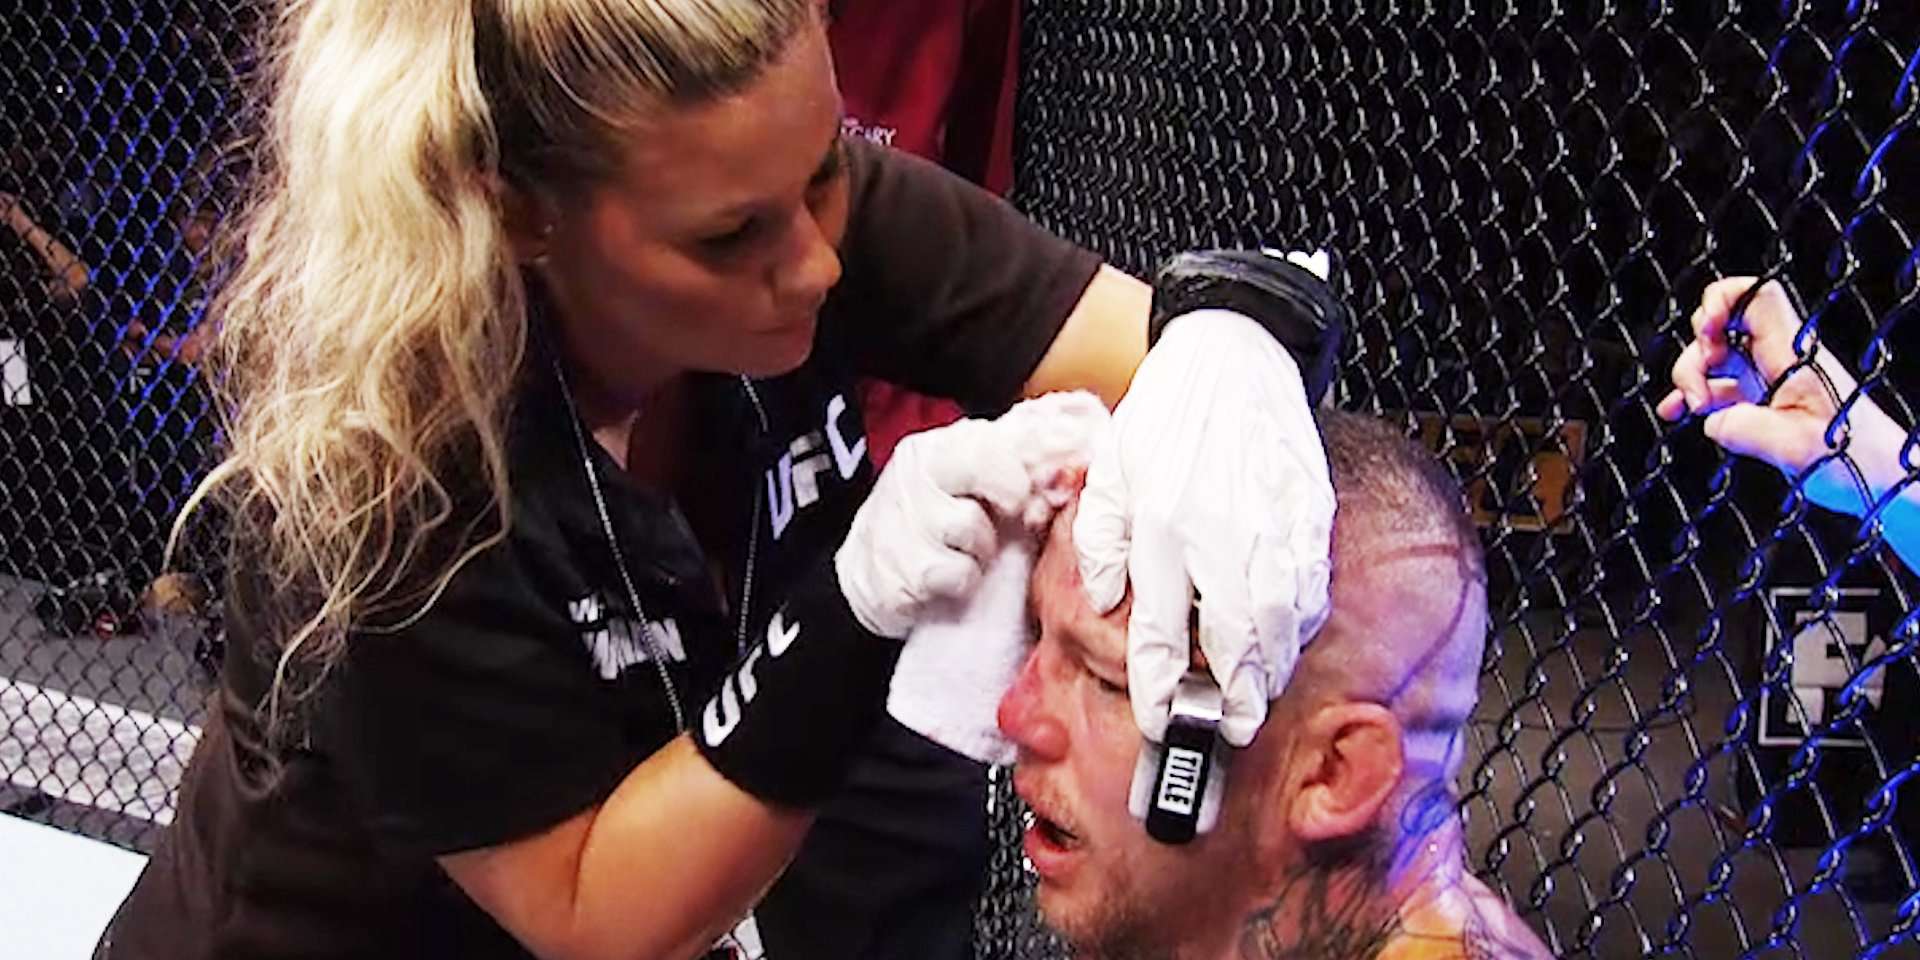 Taboola Ad Example 54004 - Swayze Valentine Is The Only Female Treating Fighters' Cuts And Bruises Inside The UFC Octagon